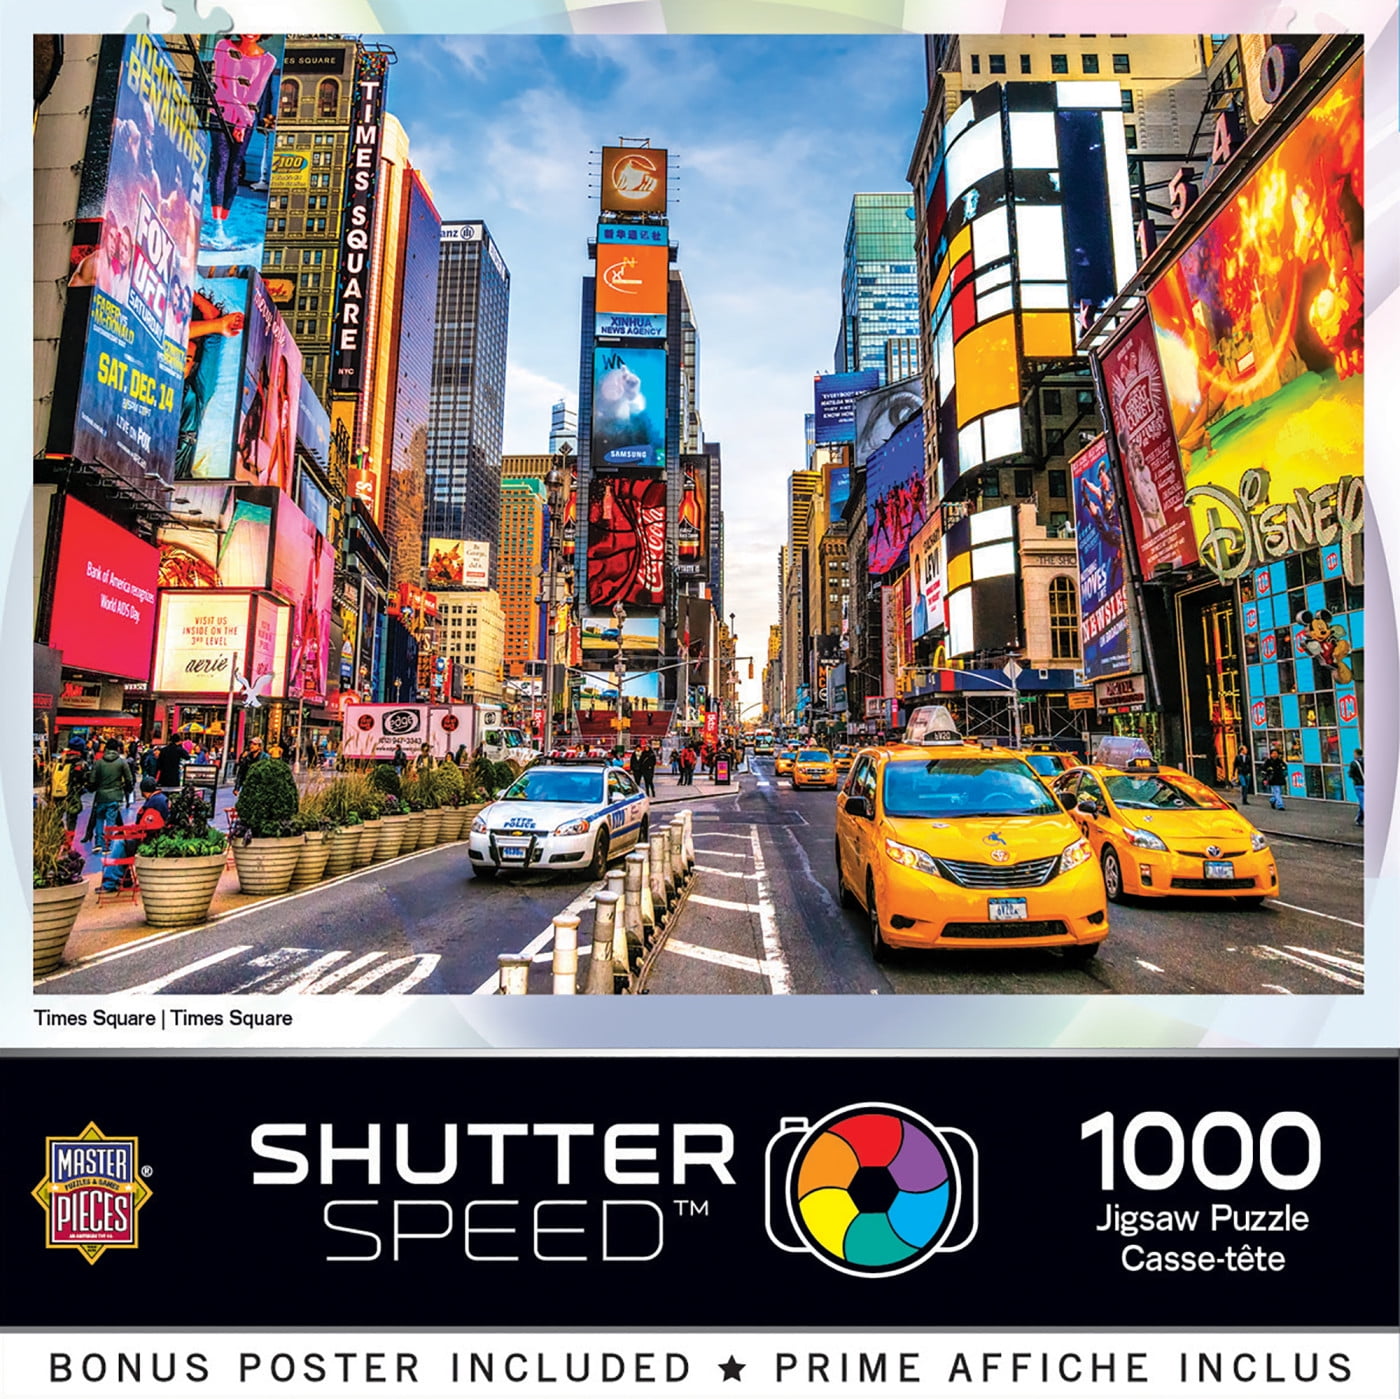 MasterPieces 1000 Piece Puzzle for Adults - All of My Best - 19.25 x26.75,  1000 pc, 19.25x26.75 - Fry's Food Stores